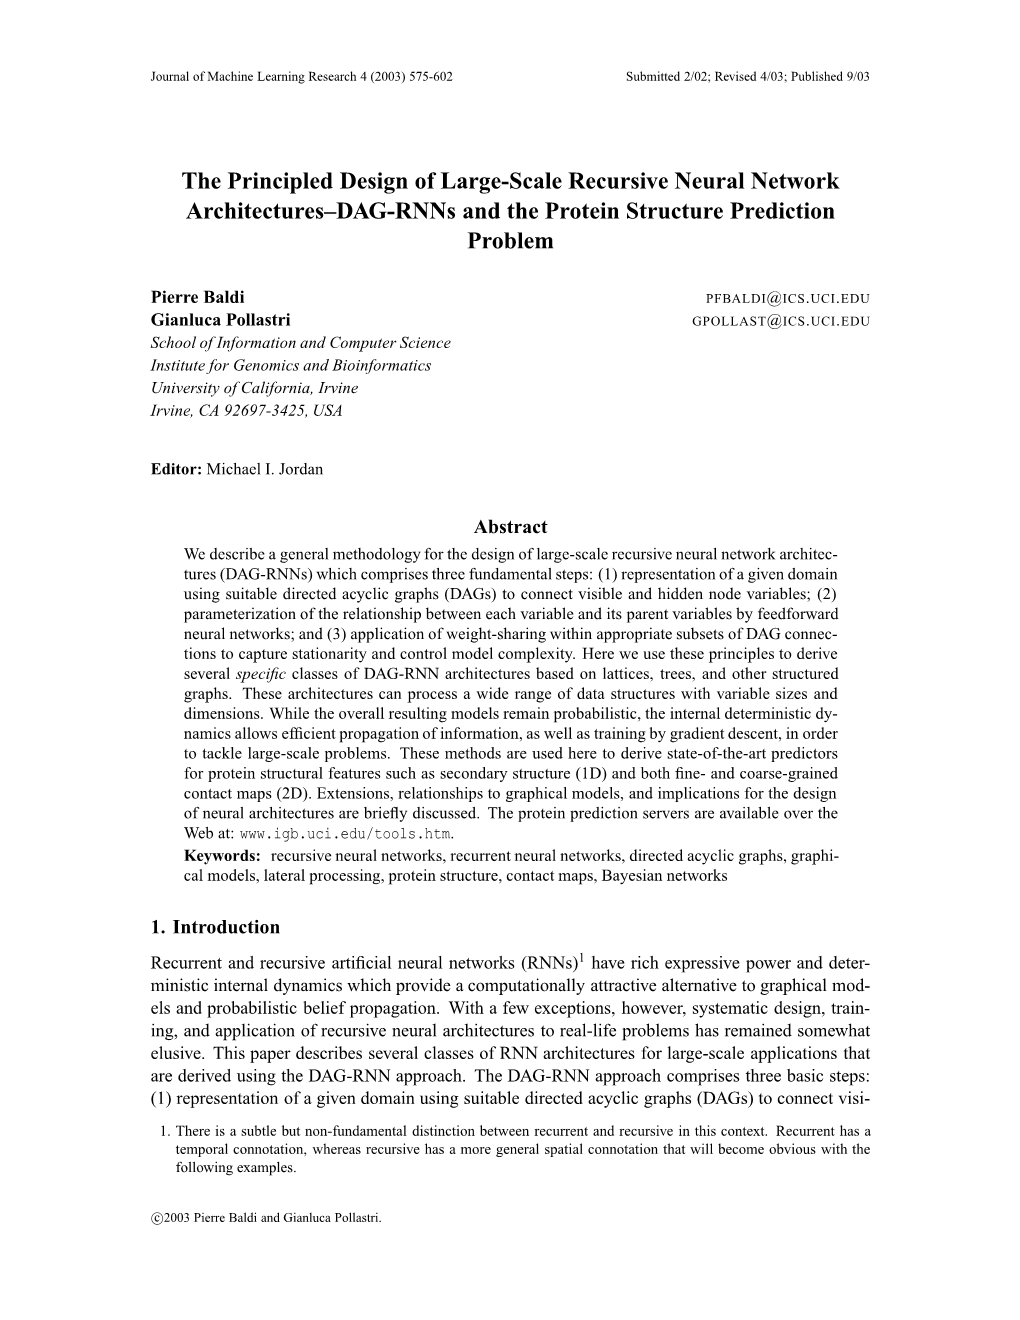 The Principled Design of Large-Scale Recursive Neural Network Architectures–DAG-Rnns and the Protein Structure Prediction Problem